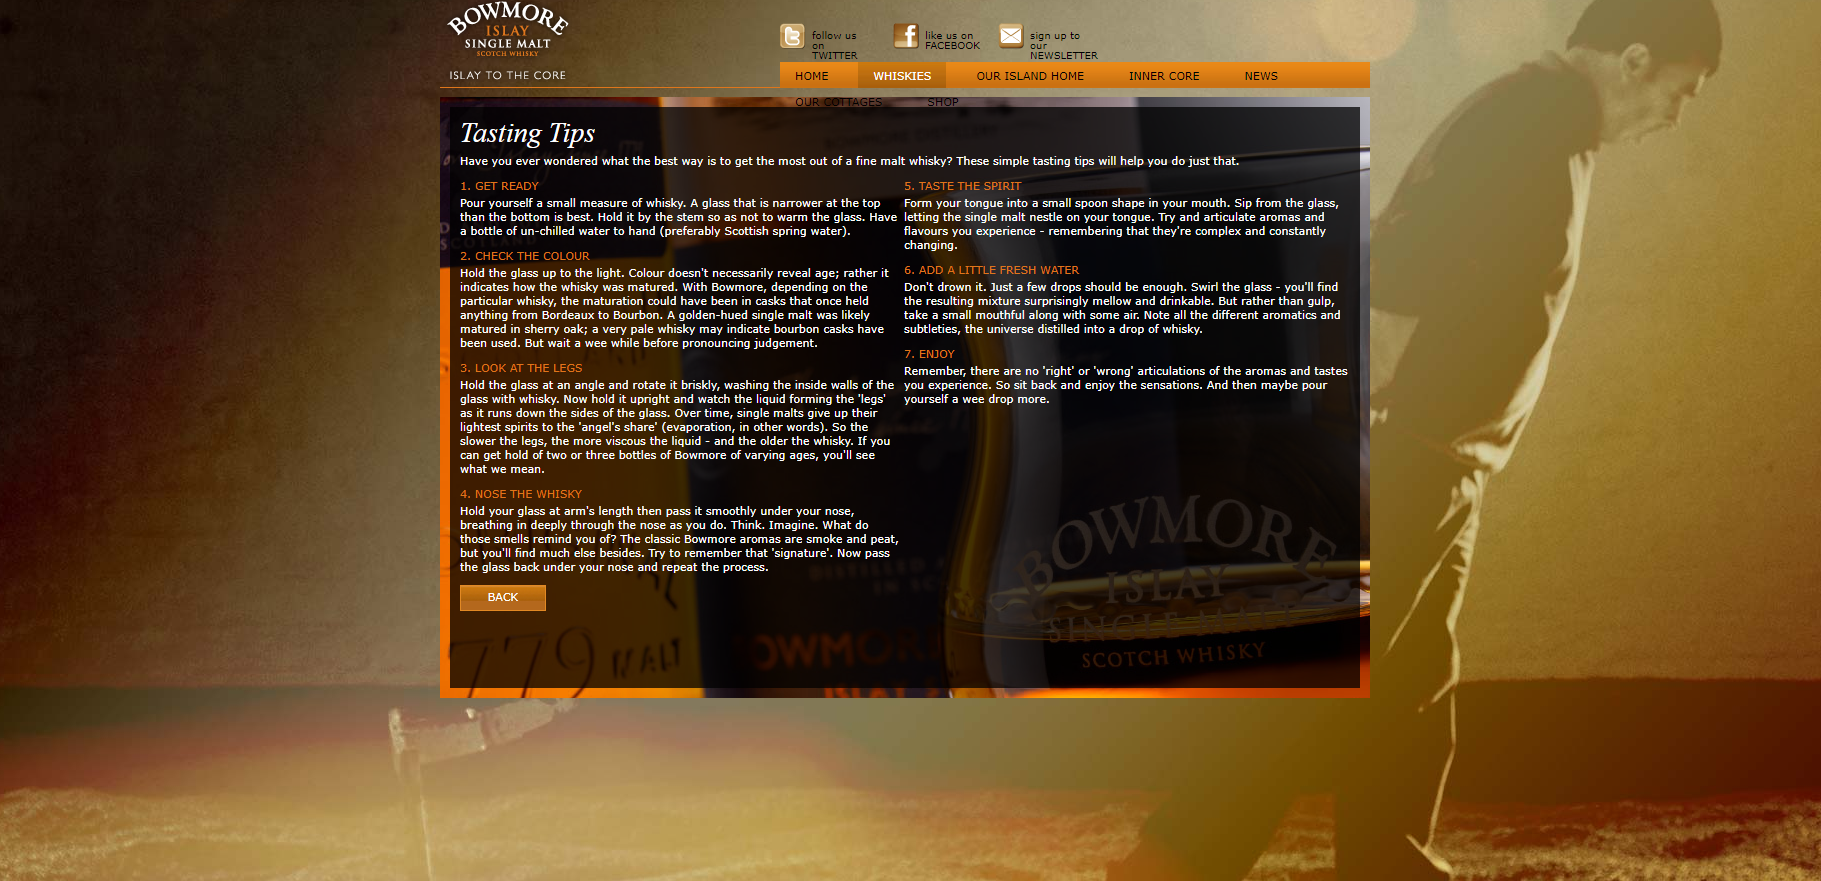 Bowmore Whisky website